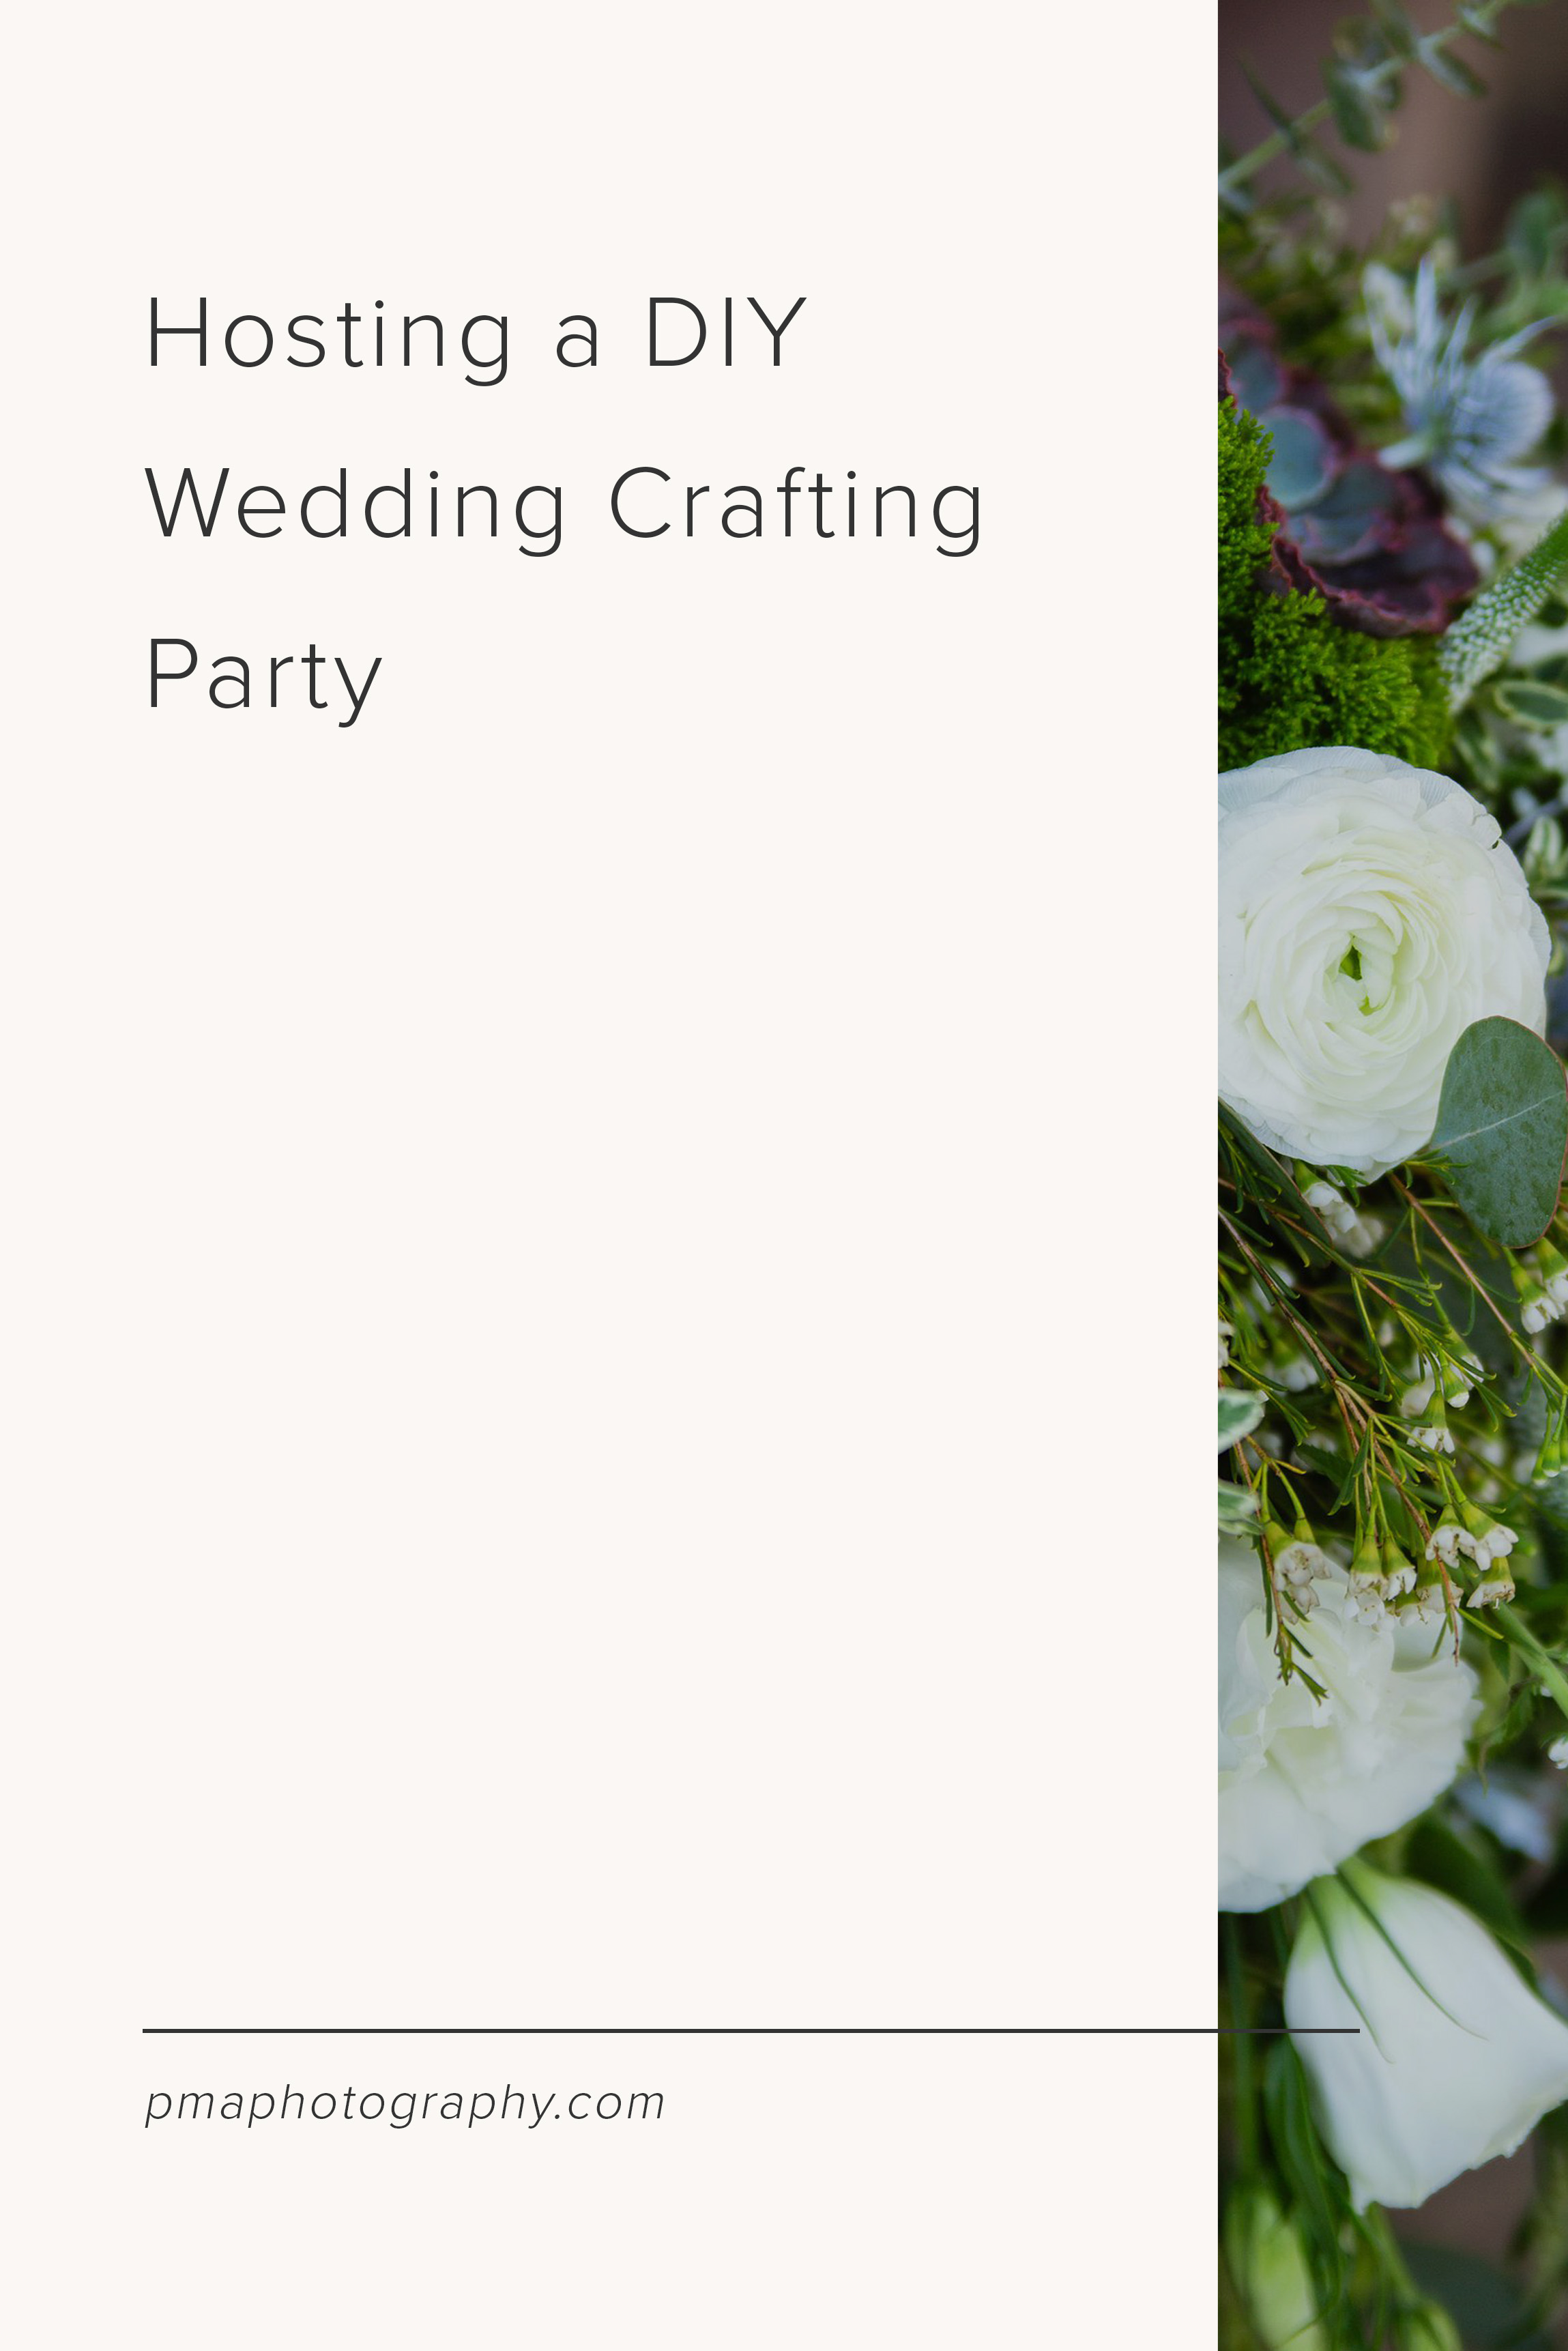 Hosting a DIY wedding crafting party by Amber of PMA Photography.